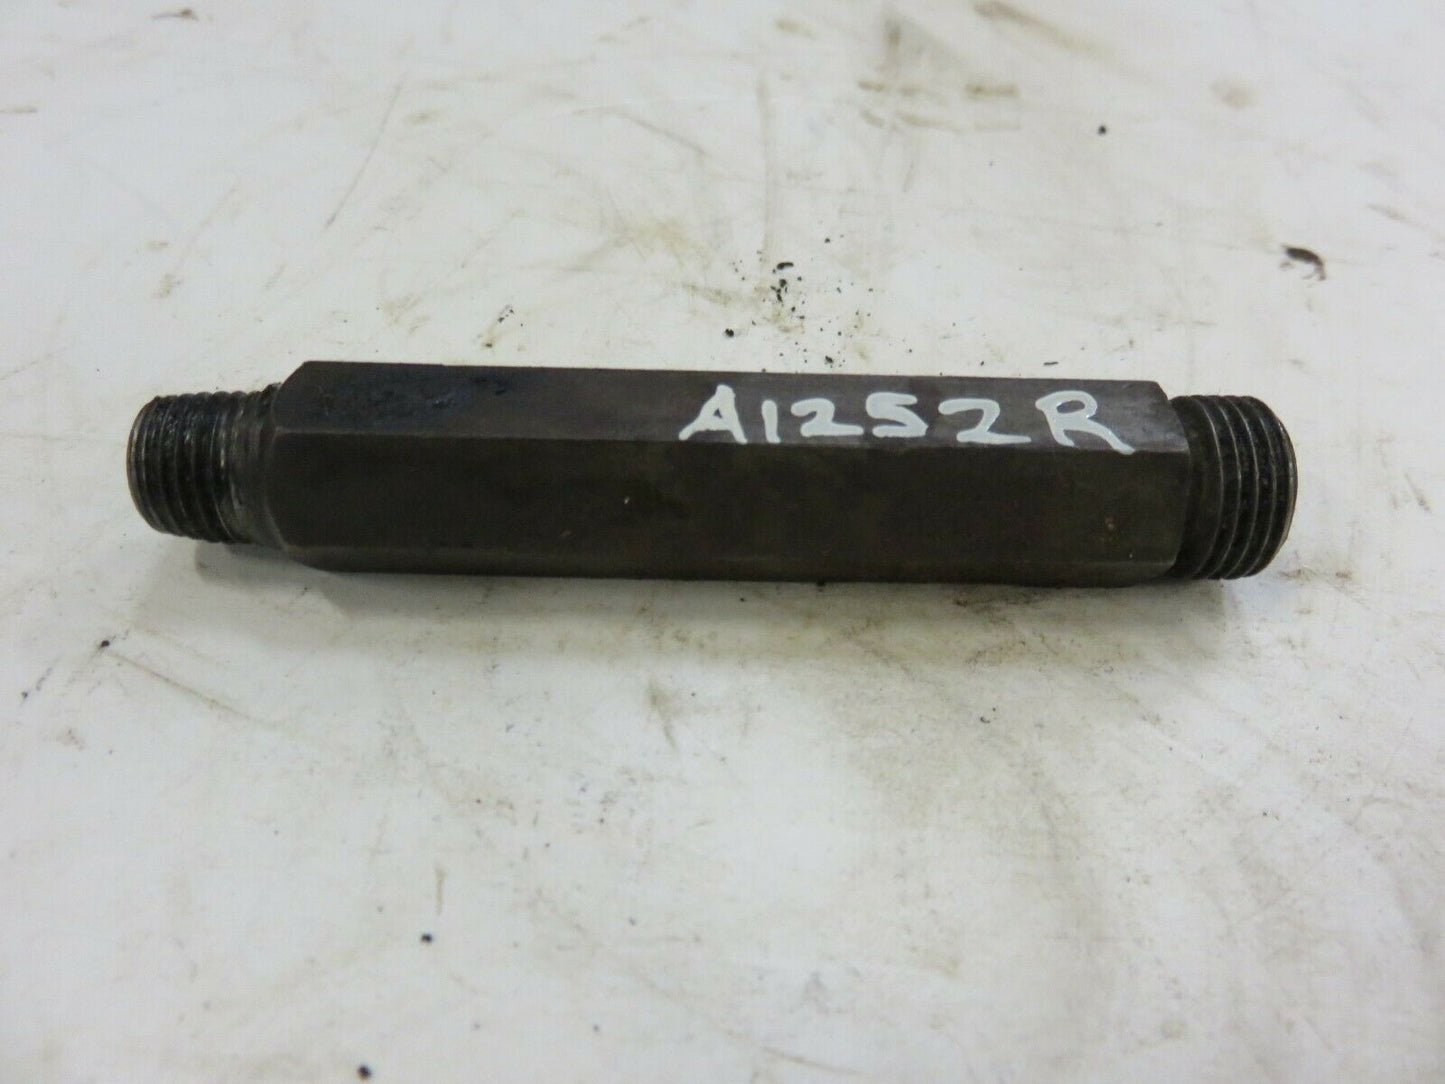 A1252R John Deere Oil Pipe To Governor Adapter Fitting For A, AR, AO